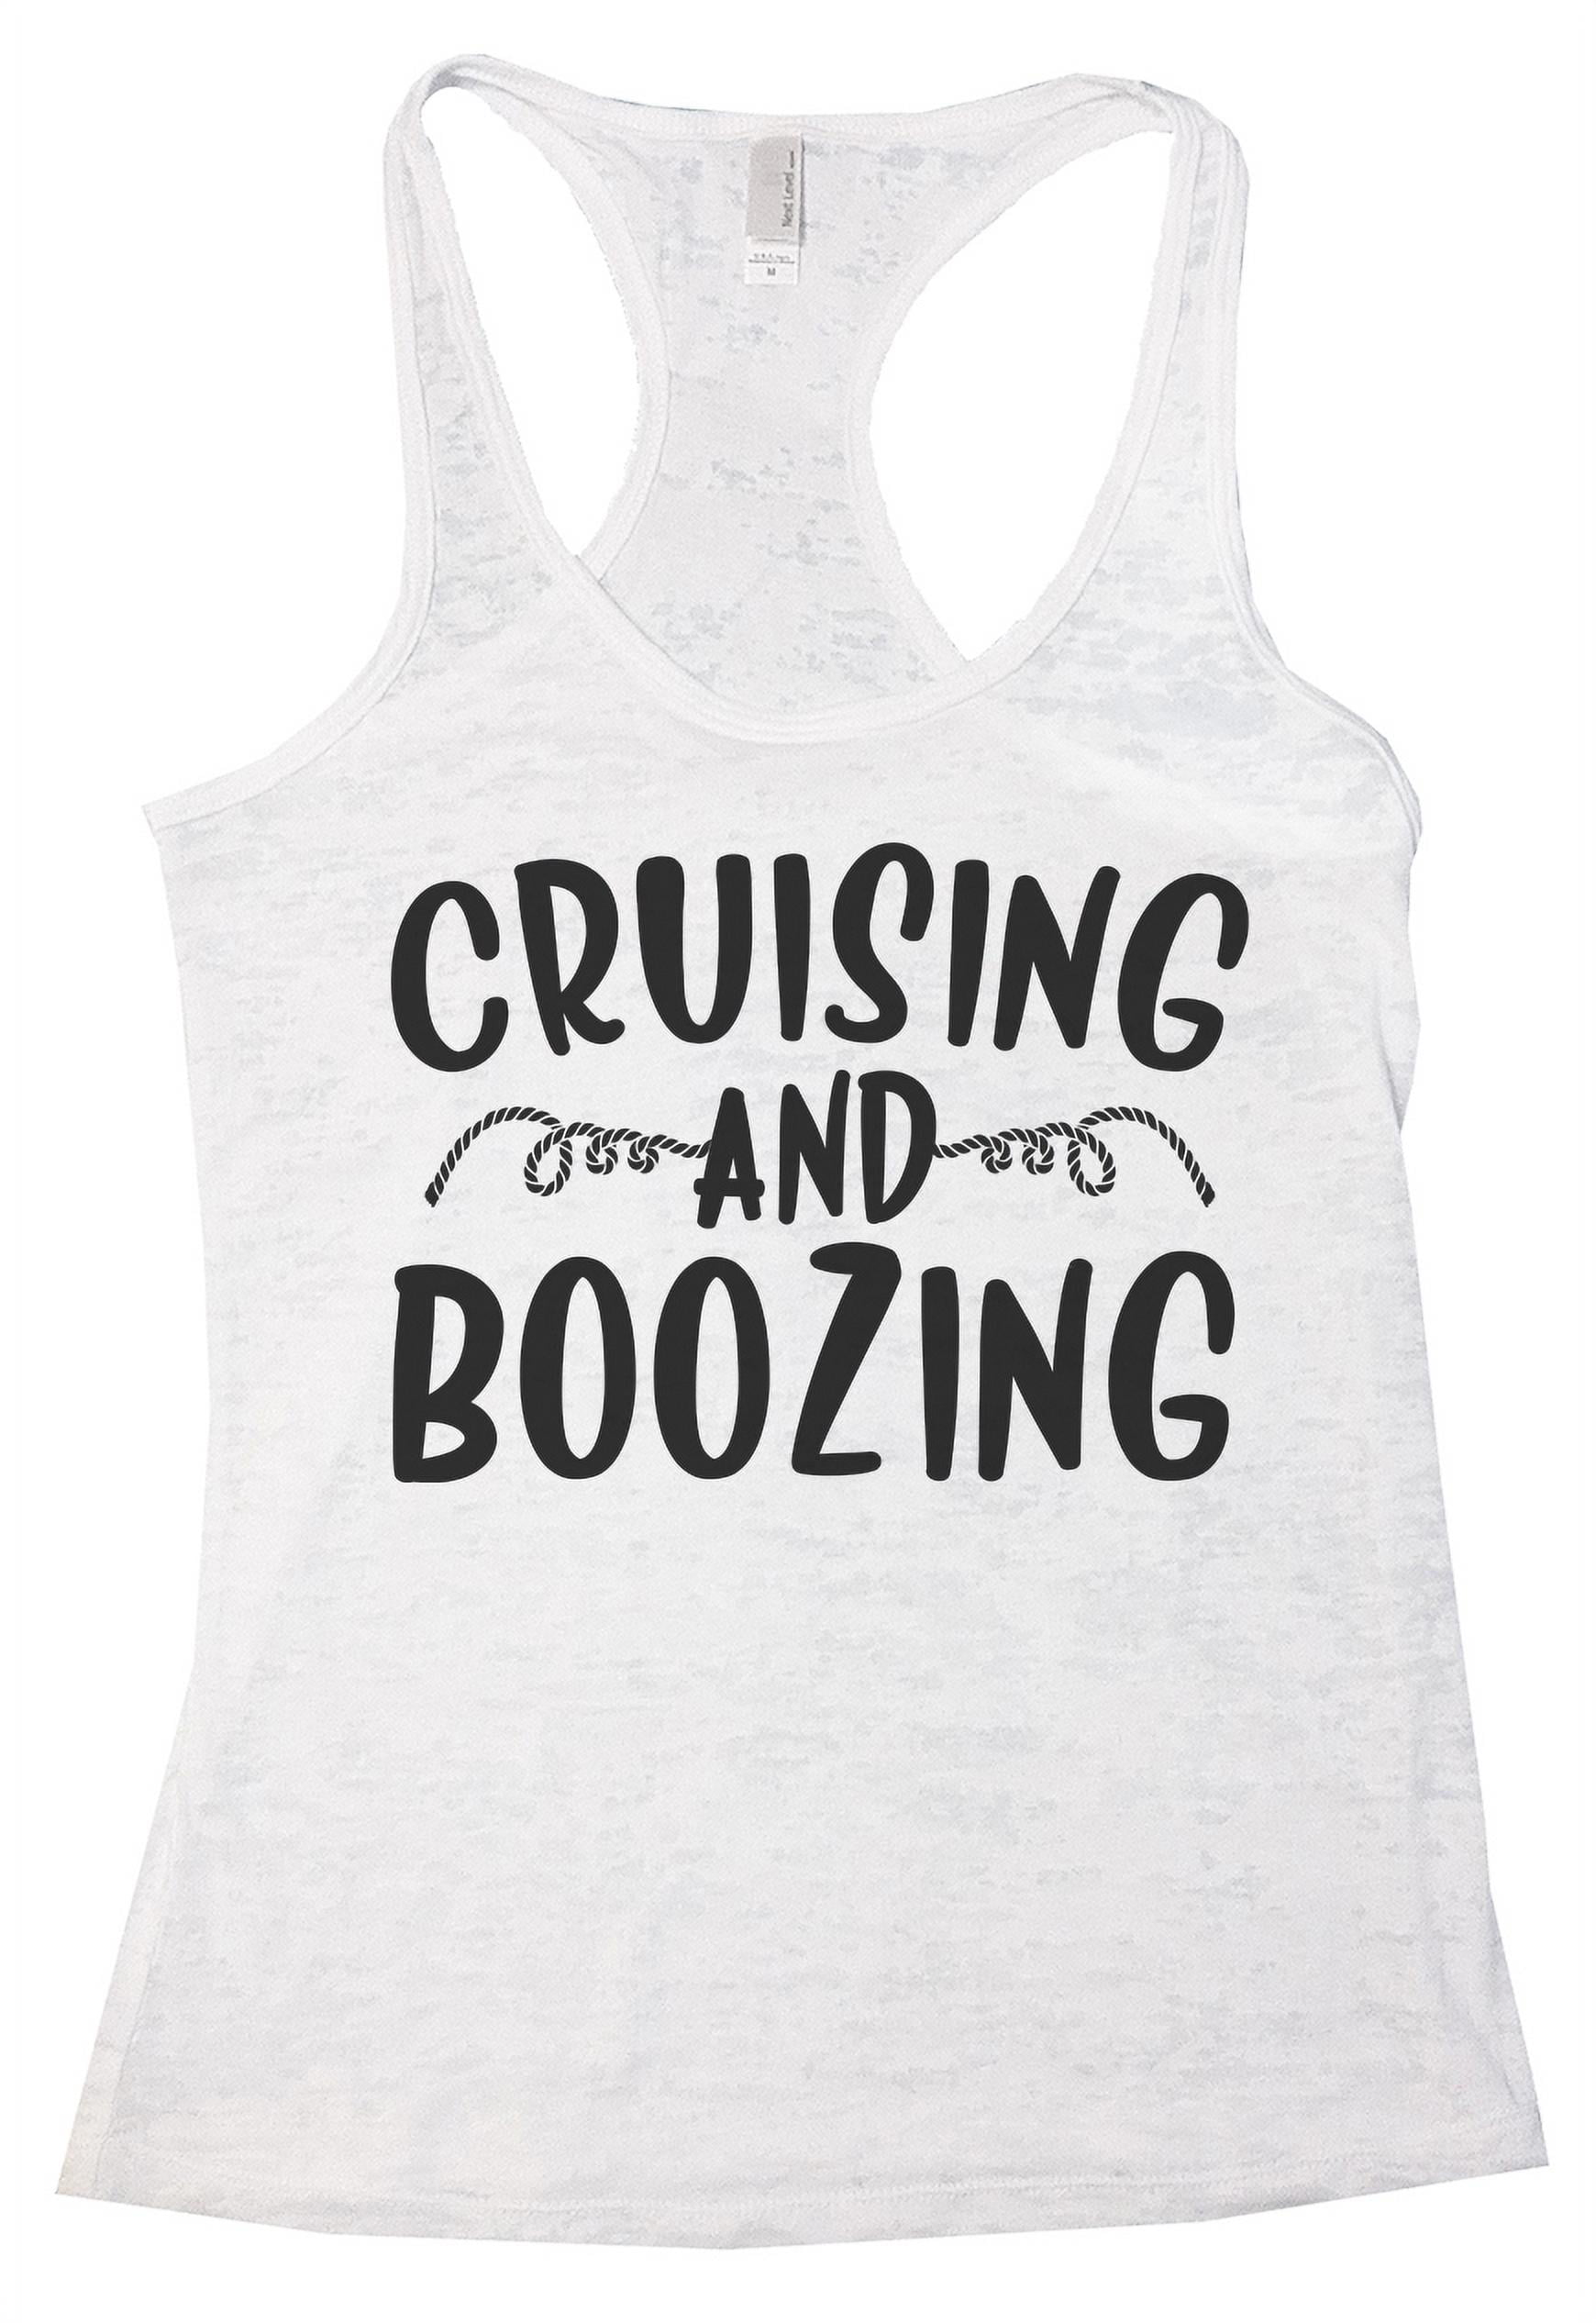 Women’s Funny Burnout “Cruising And Boozing